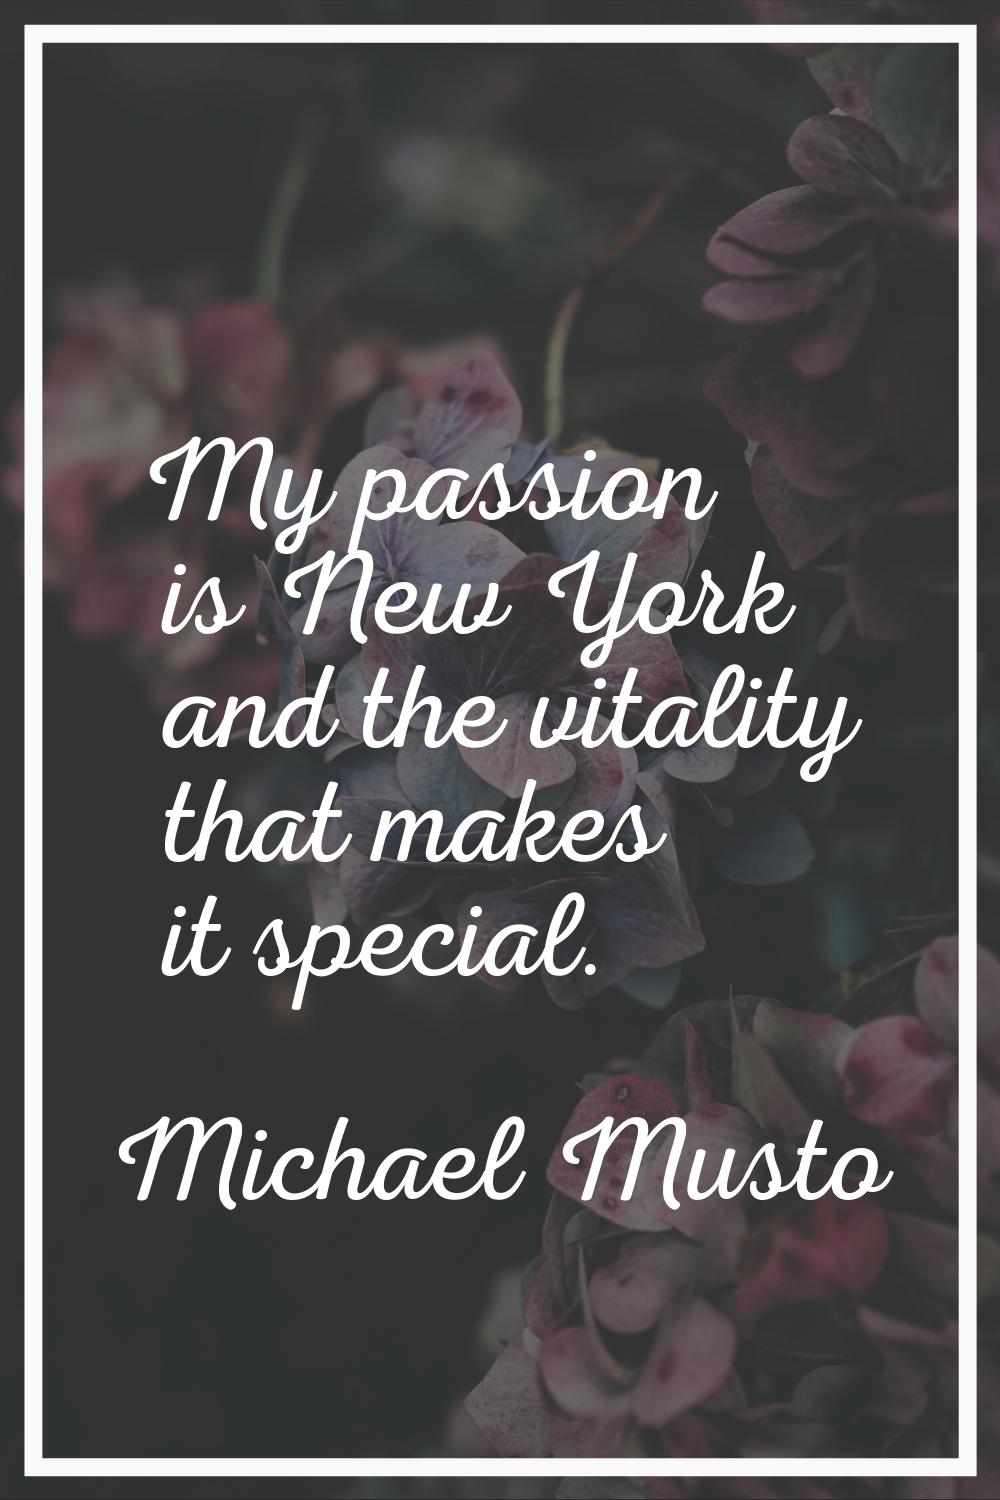 My passion is New York and the vitality that makes it special.